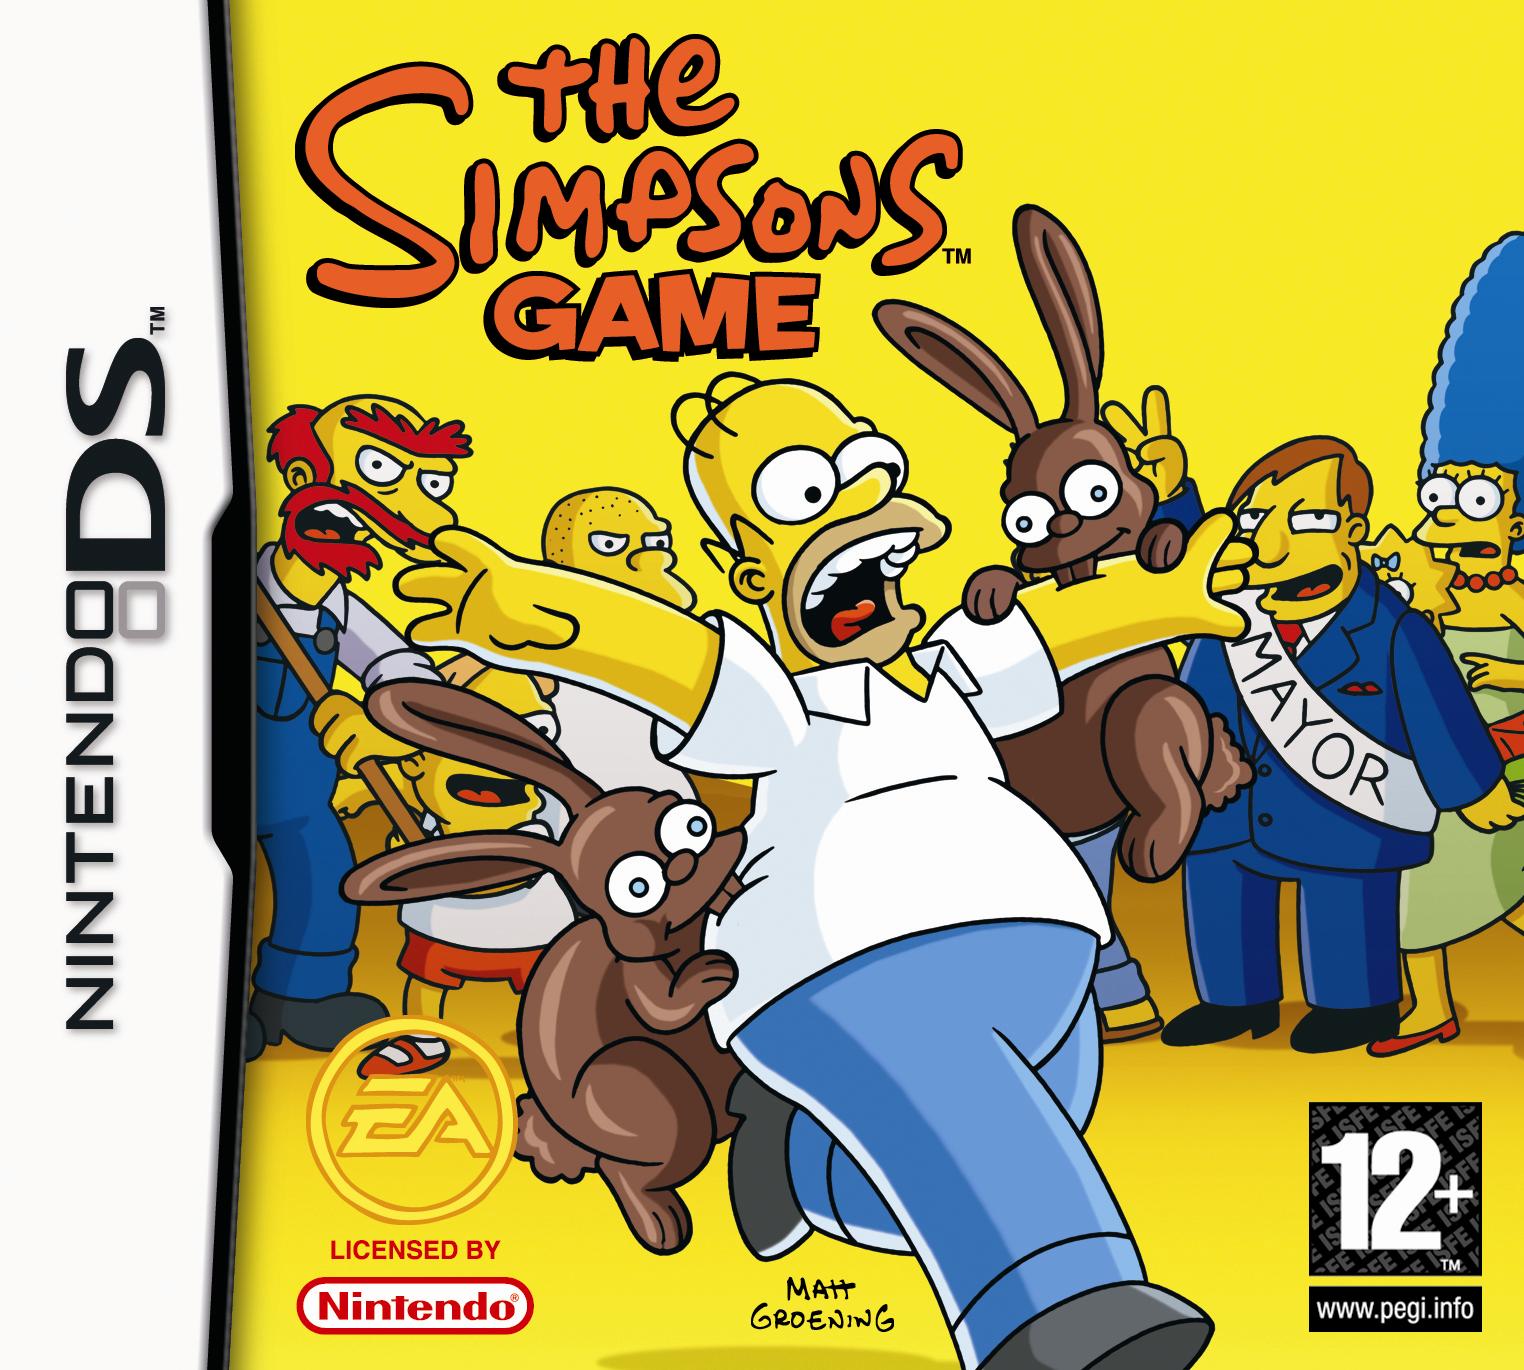 Game | Nintendo DS | The Simpsons Game